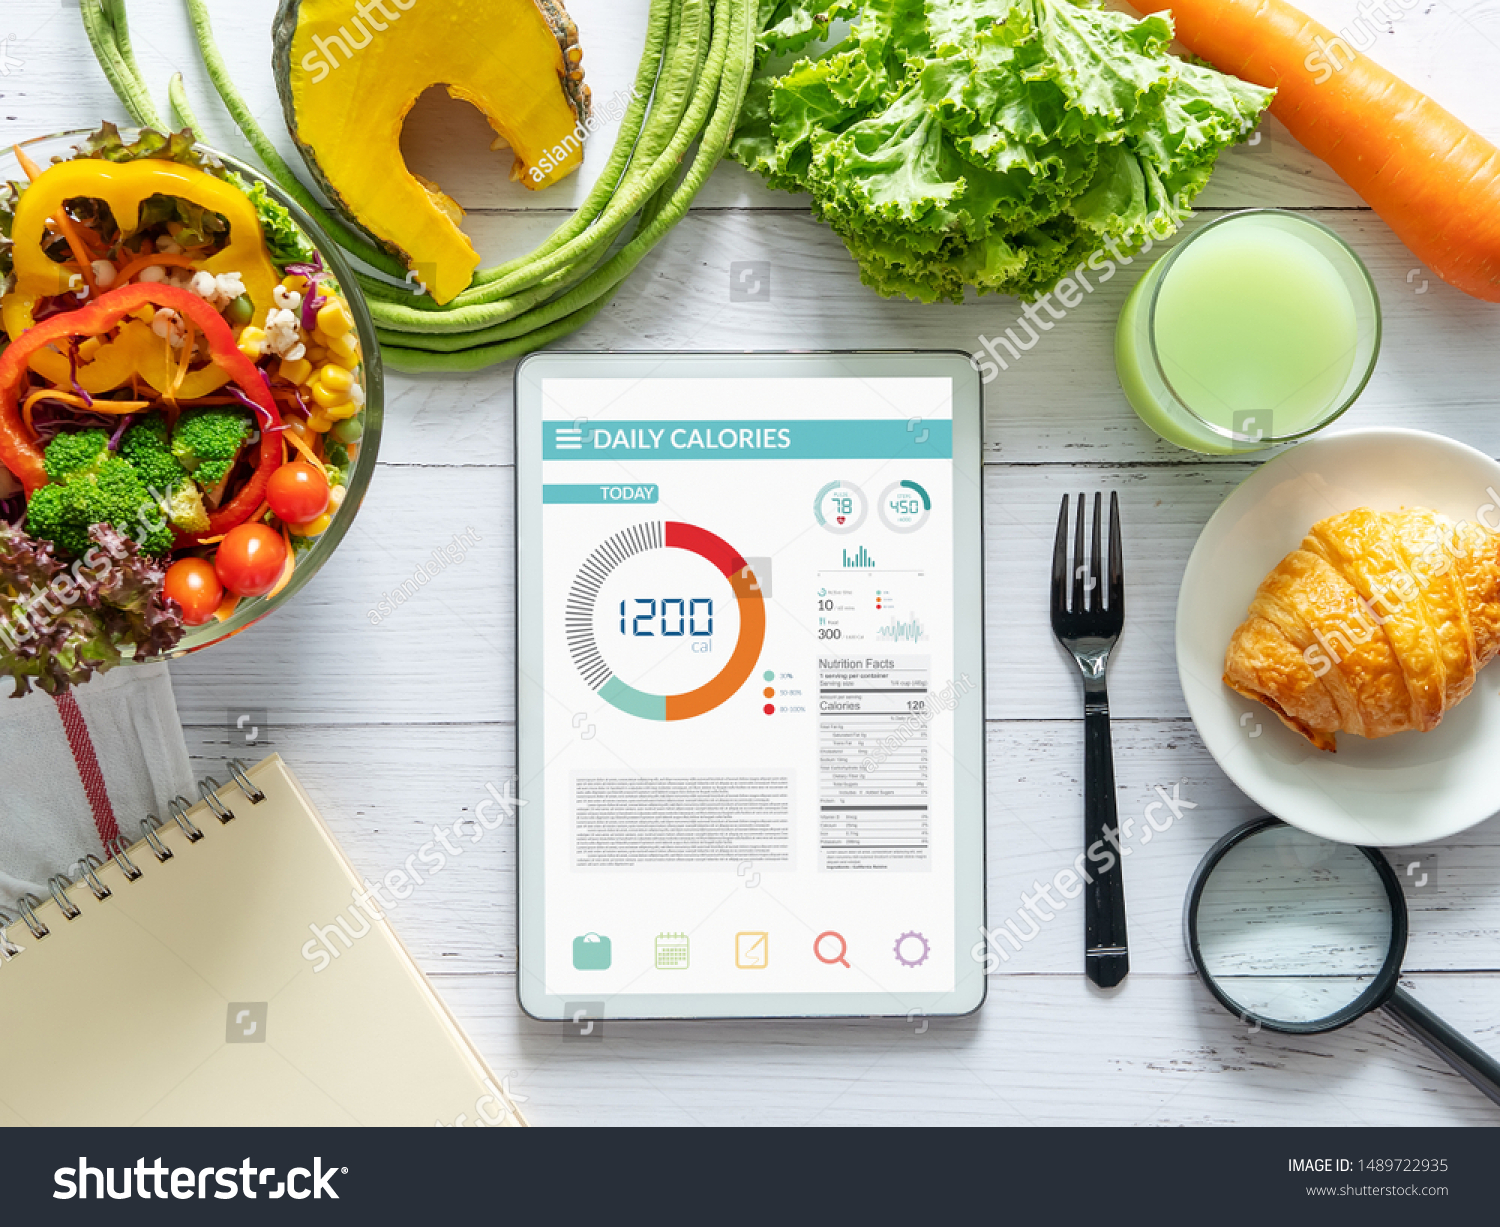 Calories counting, diet , food control and weight loss concept. tablet with Calorie counter application on screen at dining table with salad, fruit juice, bread and vegetable #1489722935